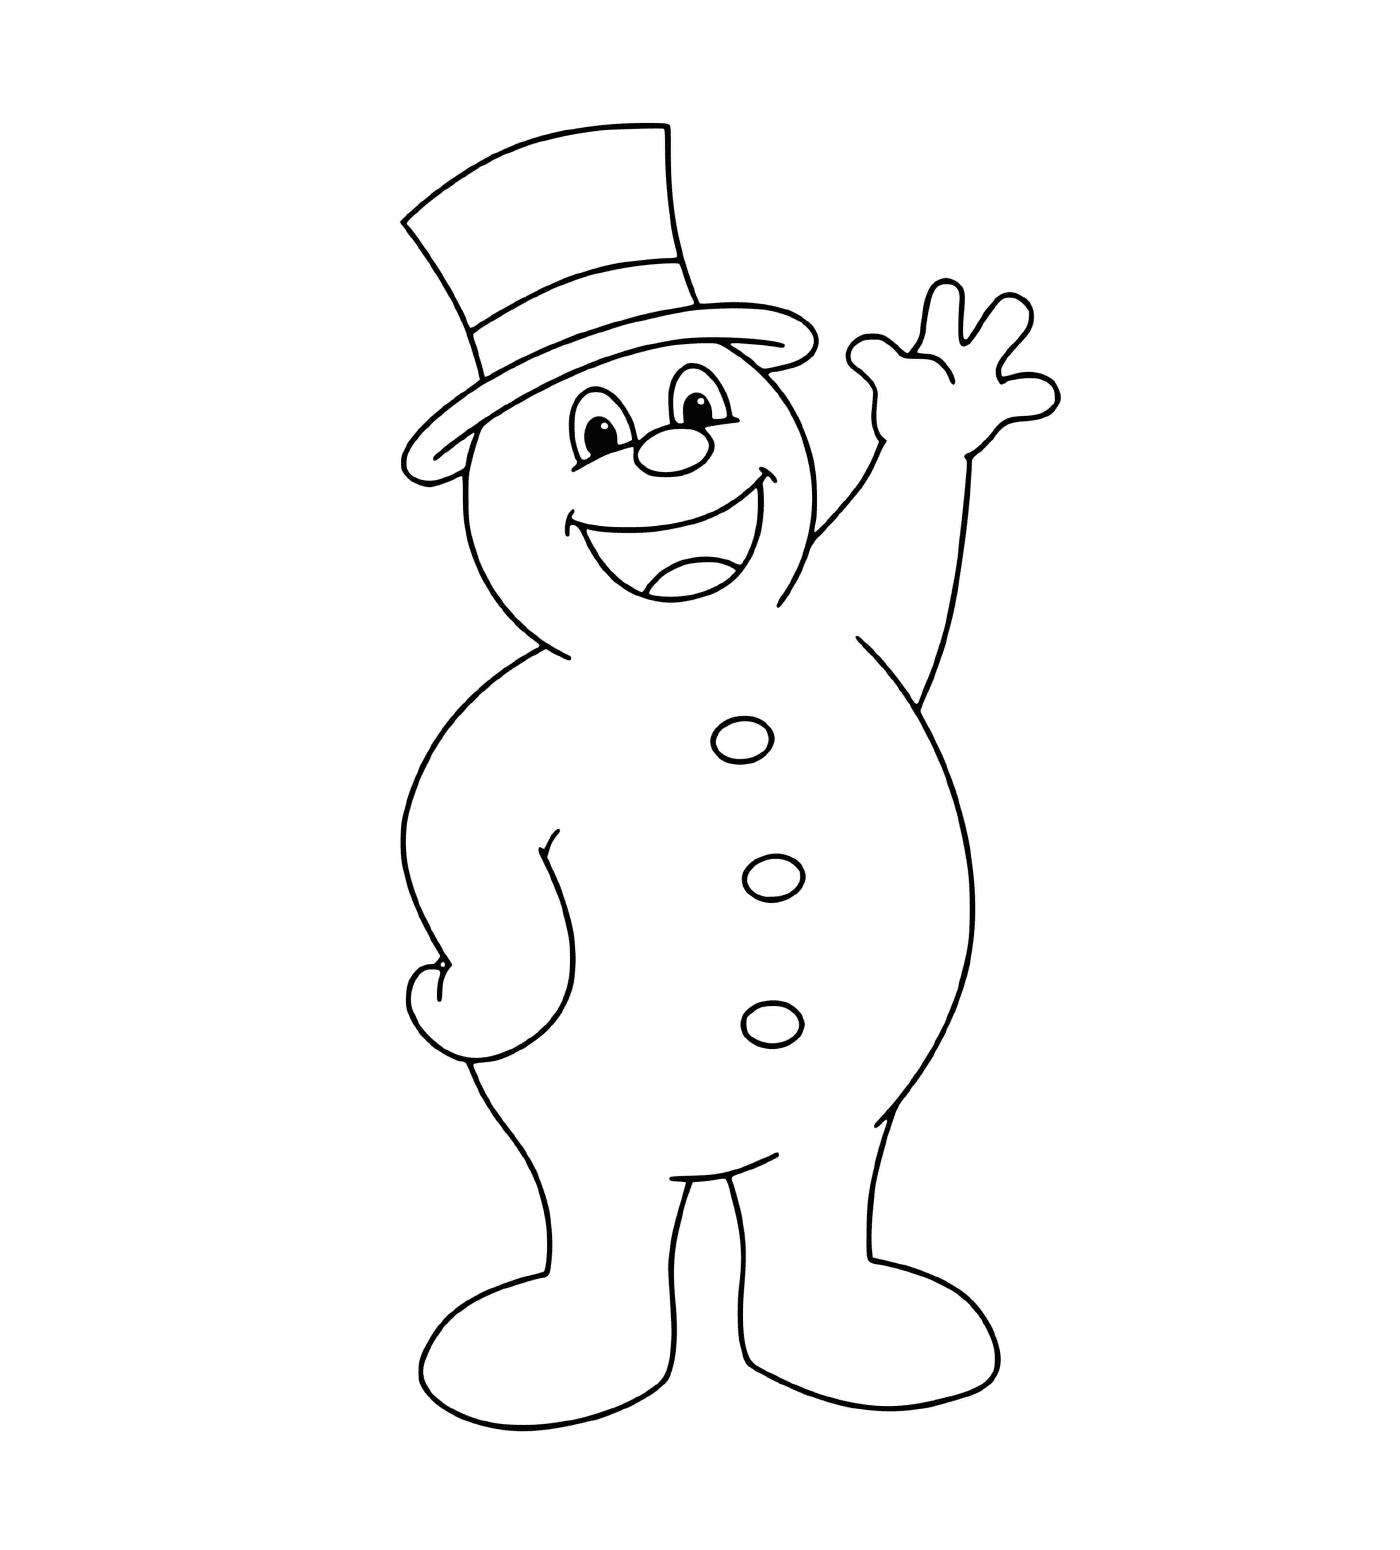  Frosty the snowman who salutes 